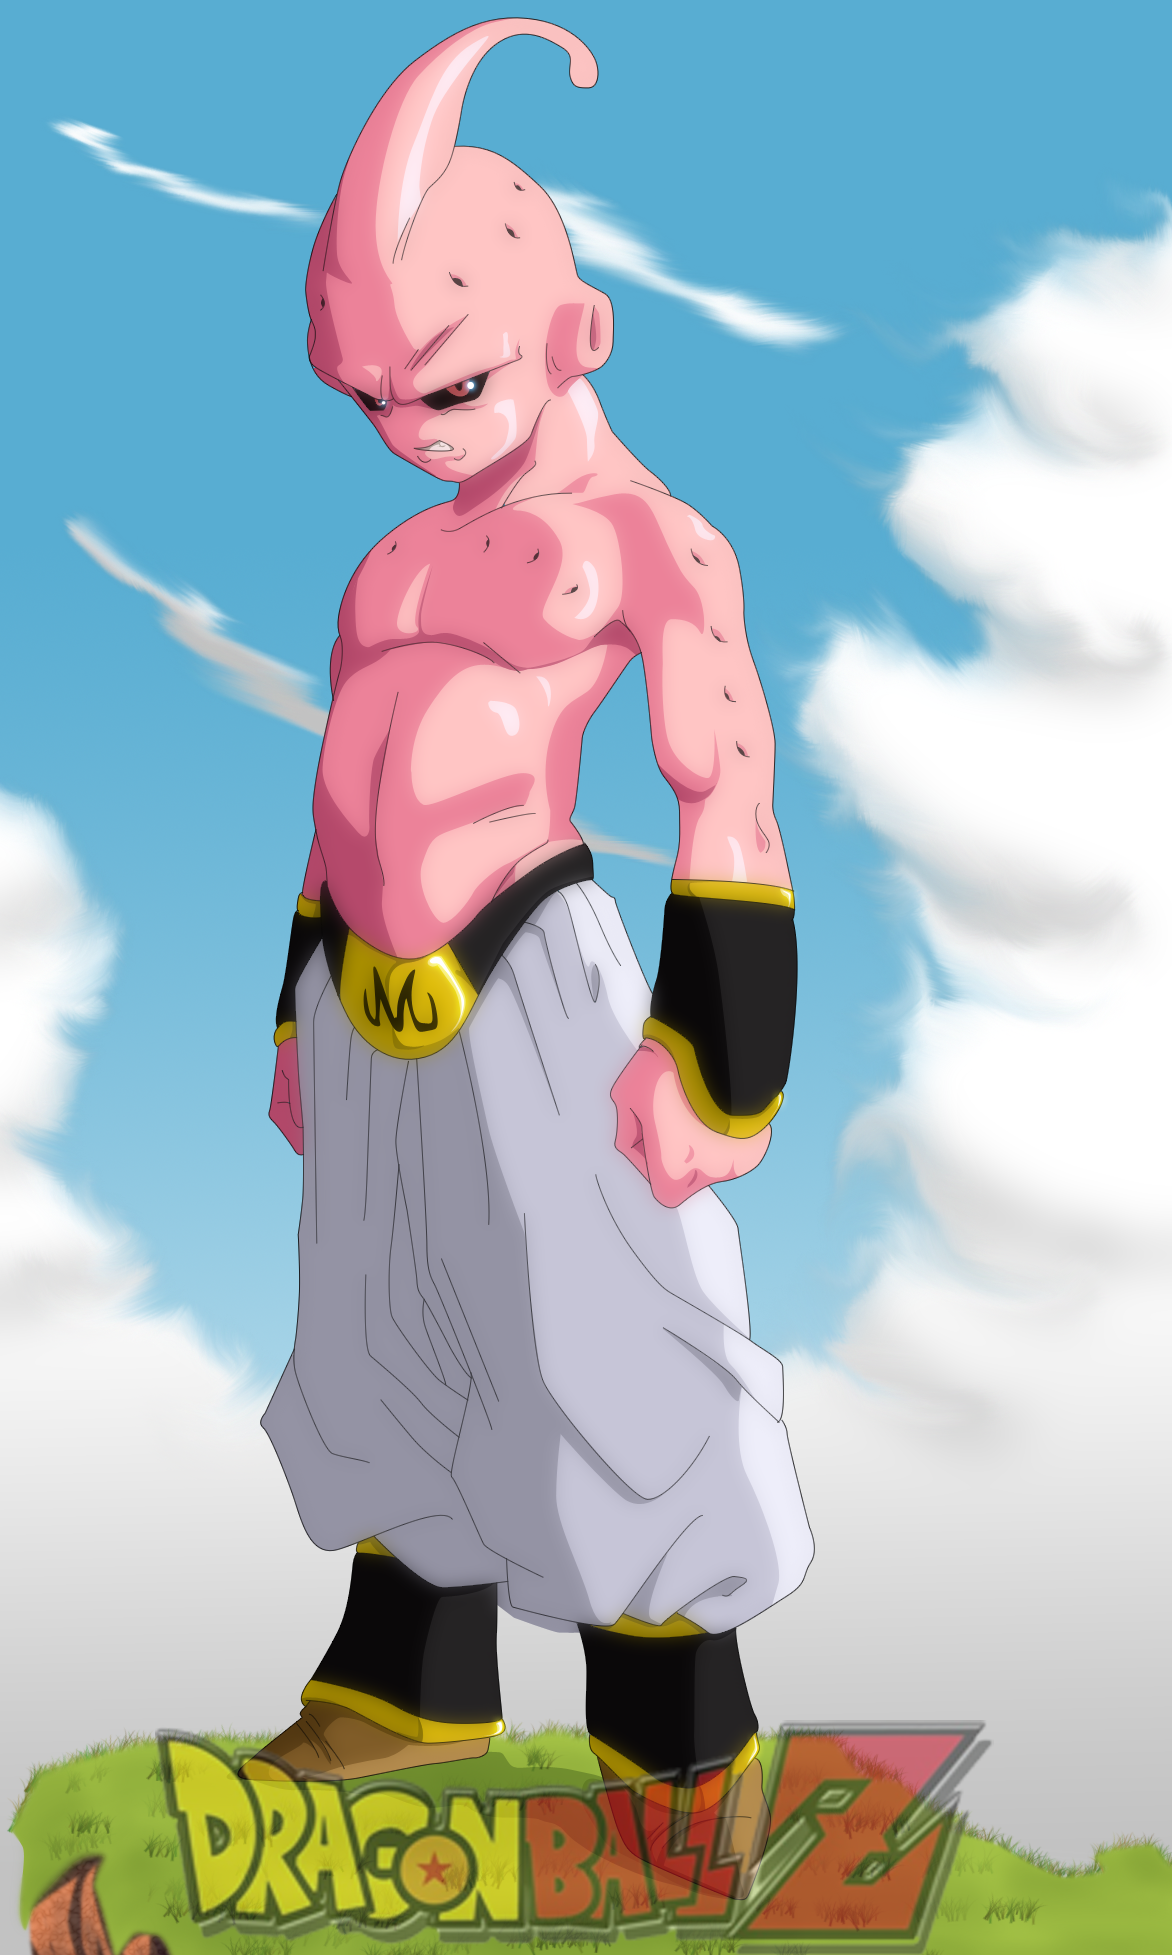 http://images4.wikia.nocookie.net/__cb20091216165010/dragonball/es/images/5/53/Kid_Buu.png